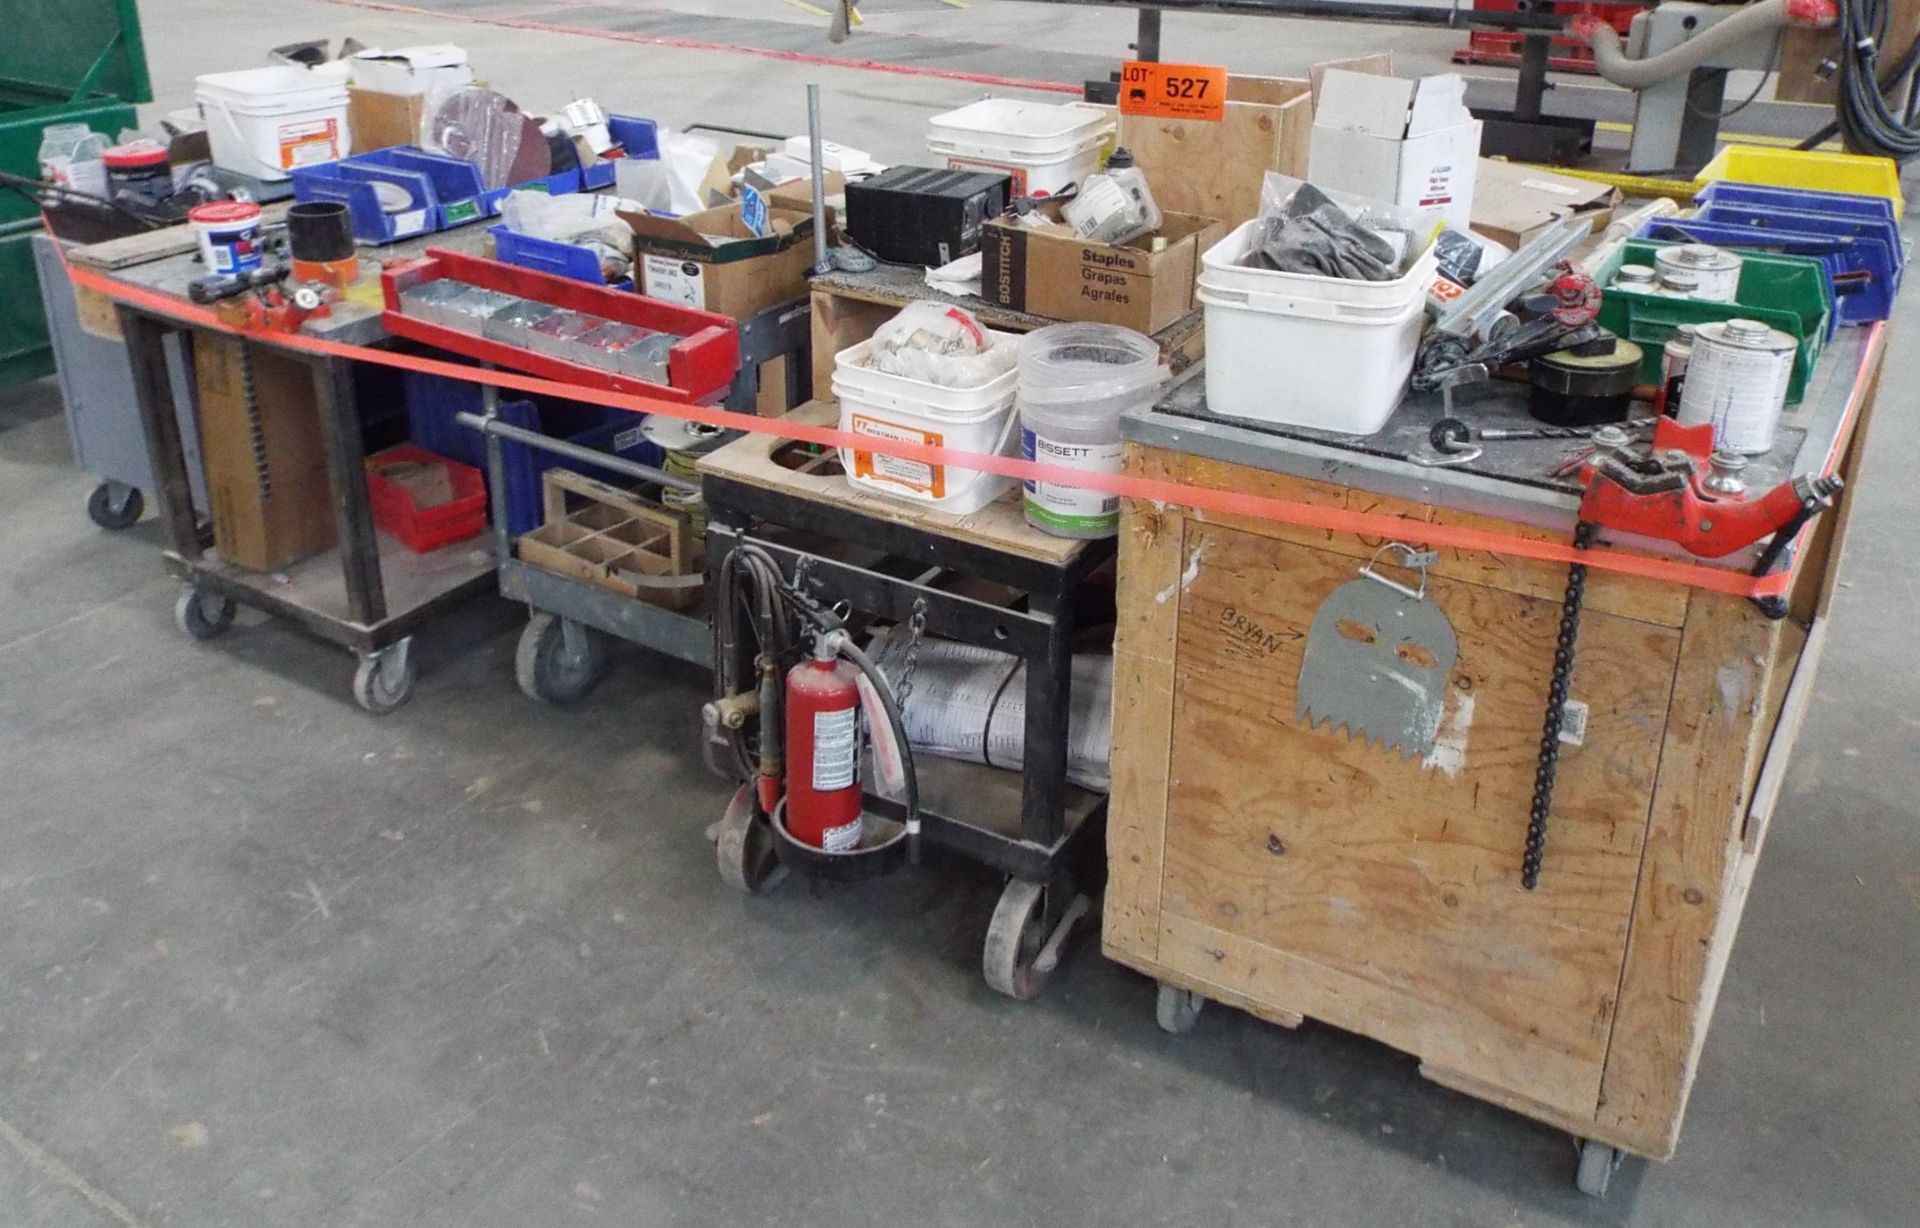 LOT/ ROLLING SHOP CARTS WITH TOOLS, VISES, AND SUPPLIES